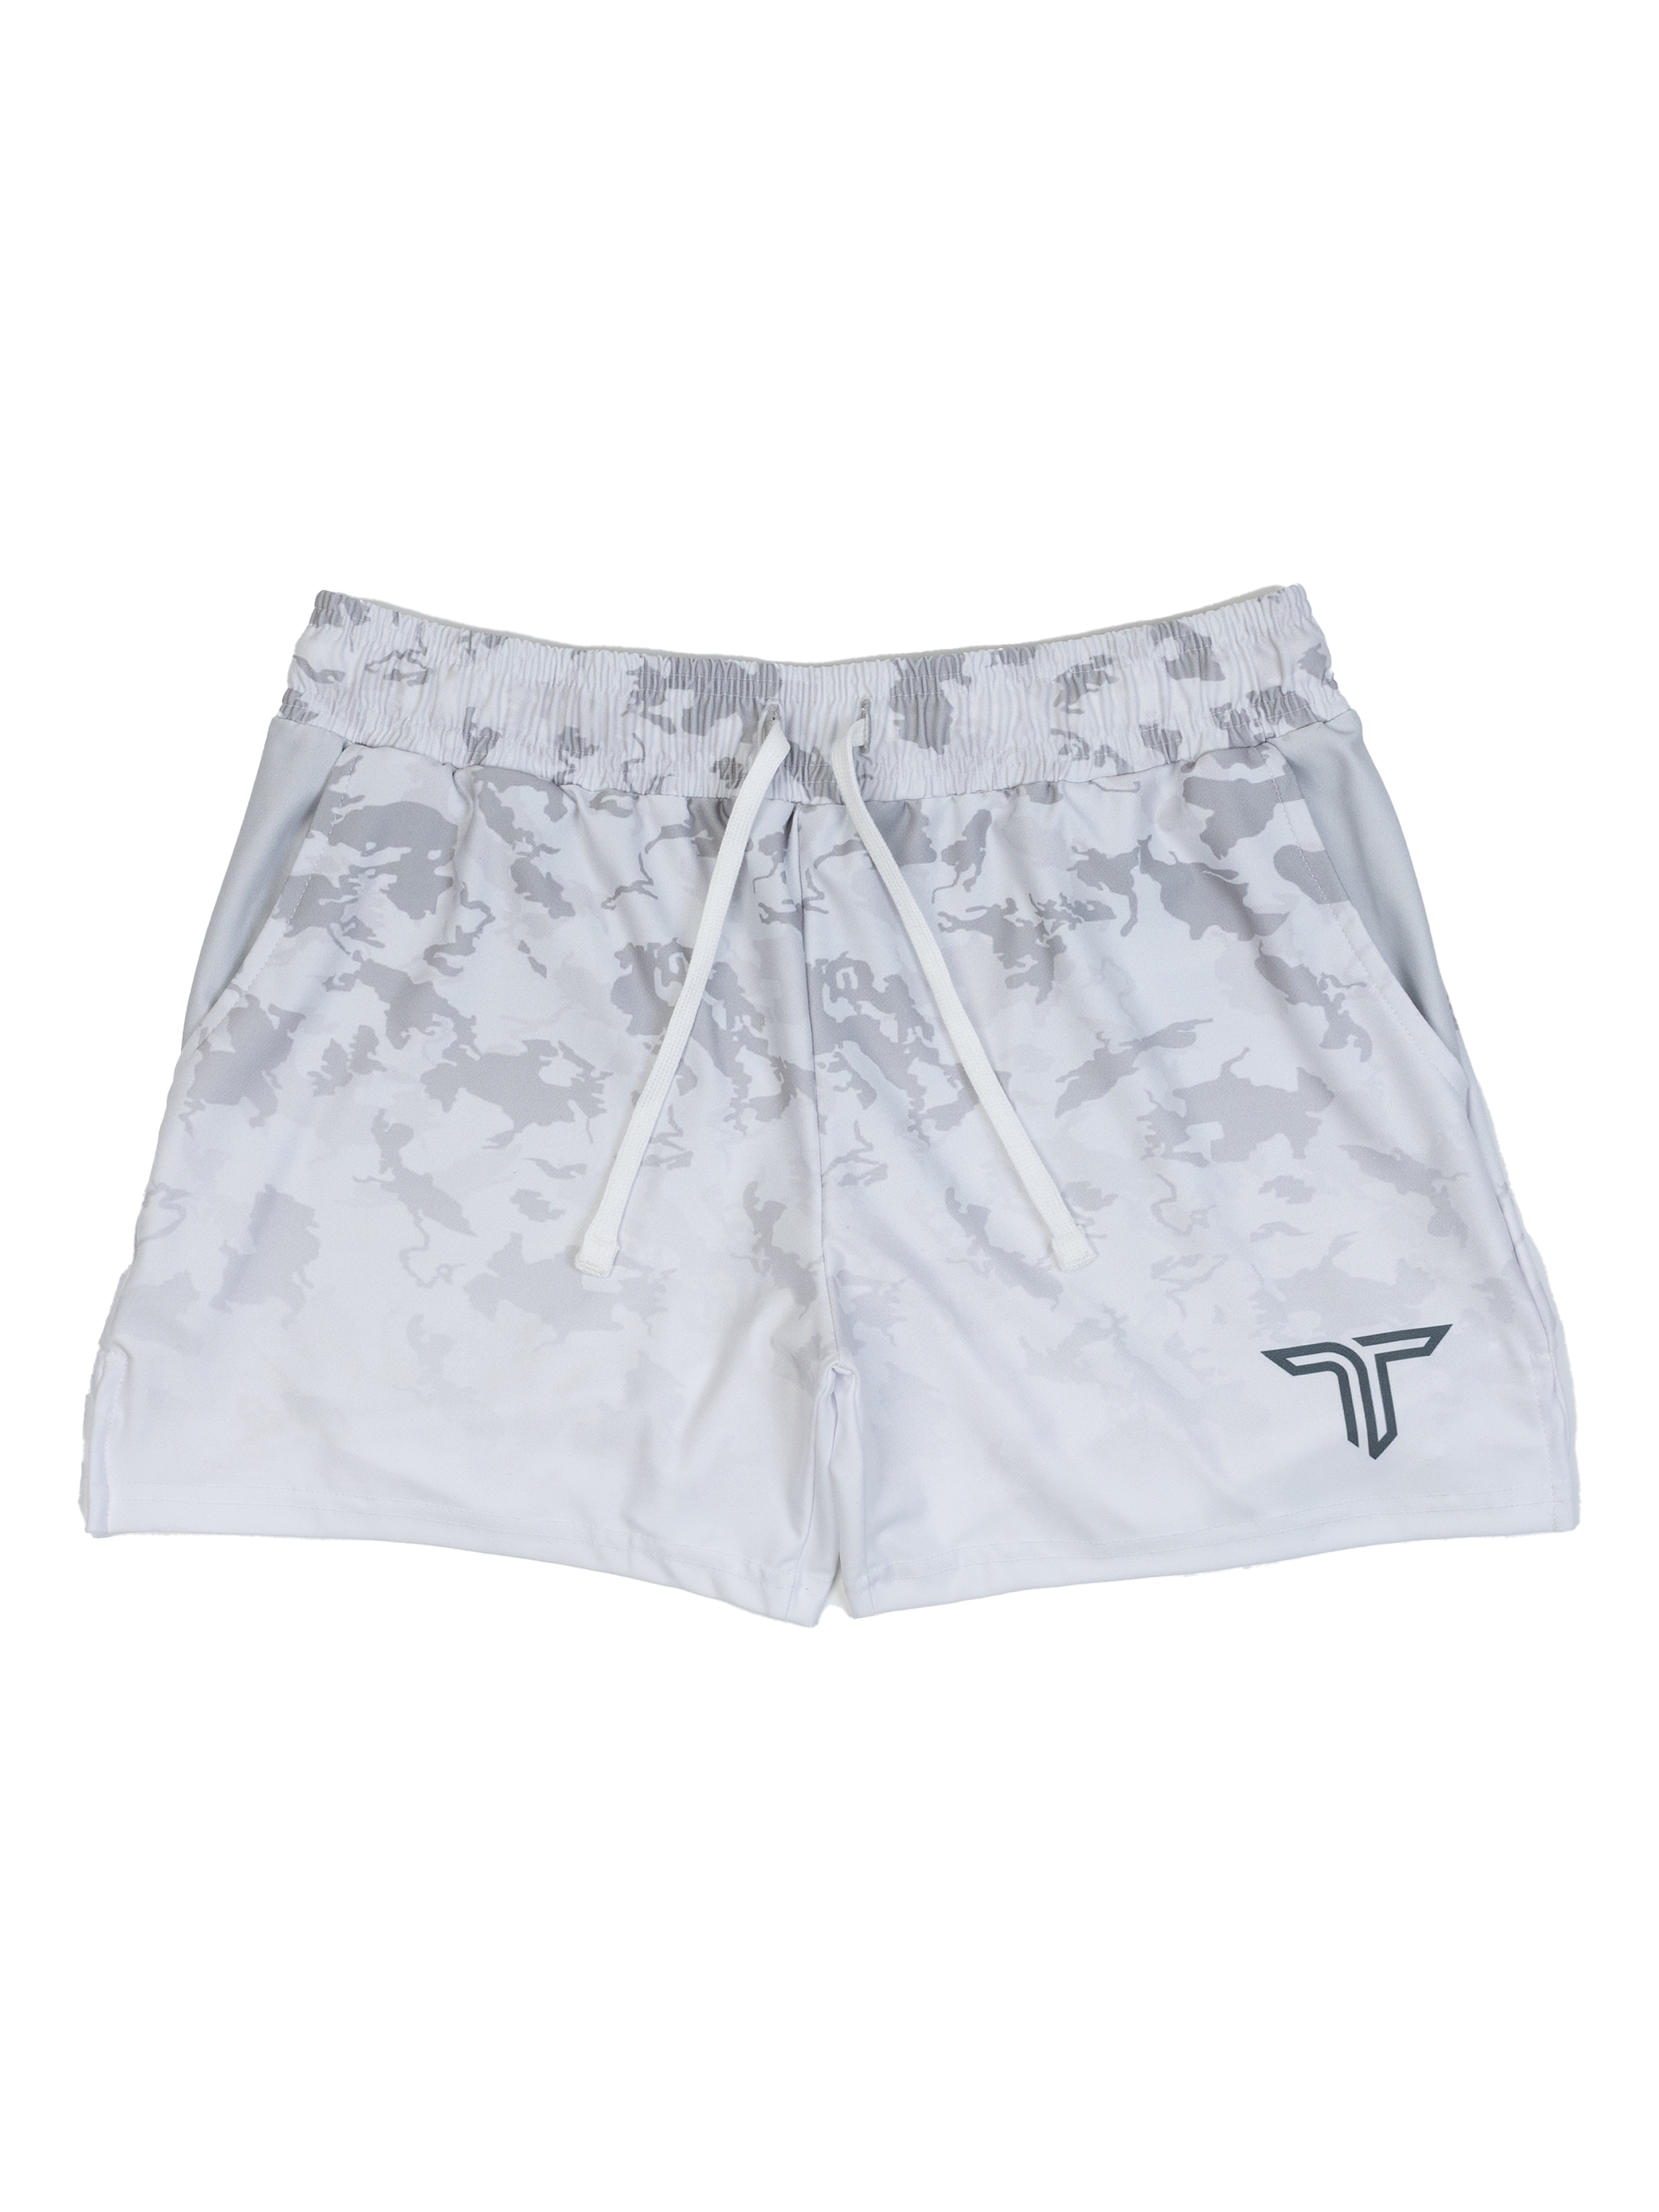 Particle Camo Women's Gym Shorts -Ghost Grey (3